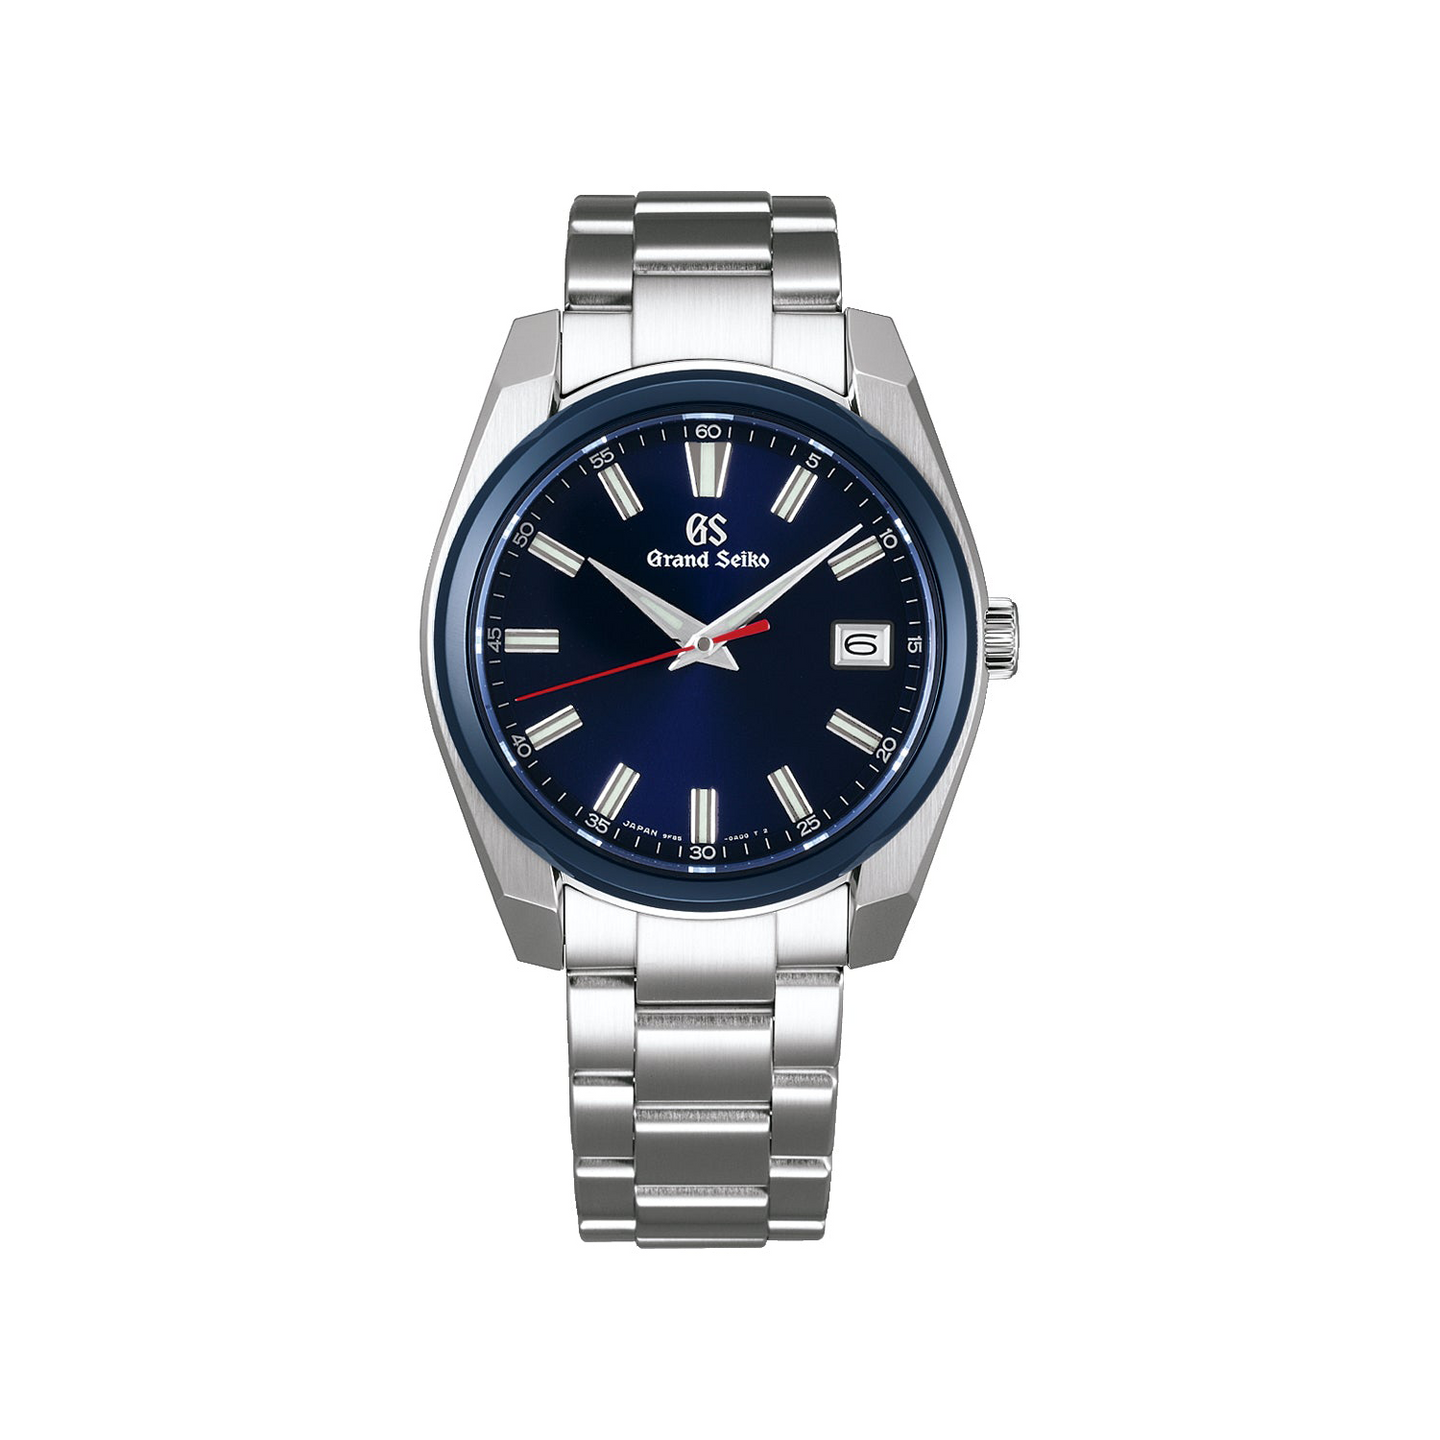 Grand Seiko Sport Watch with Blue Dial and Bezel, Limited Edition